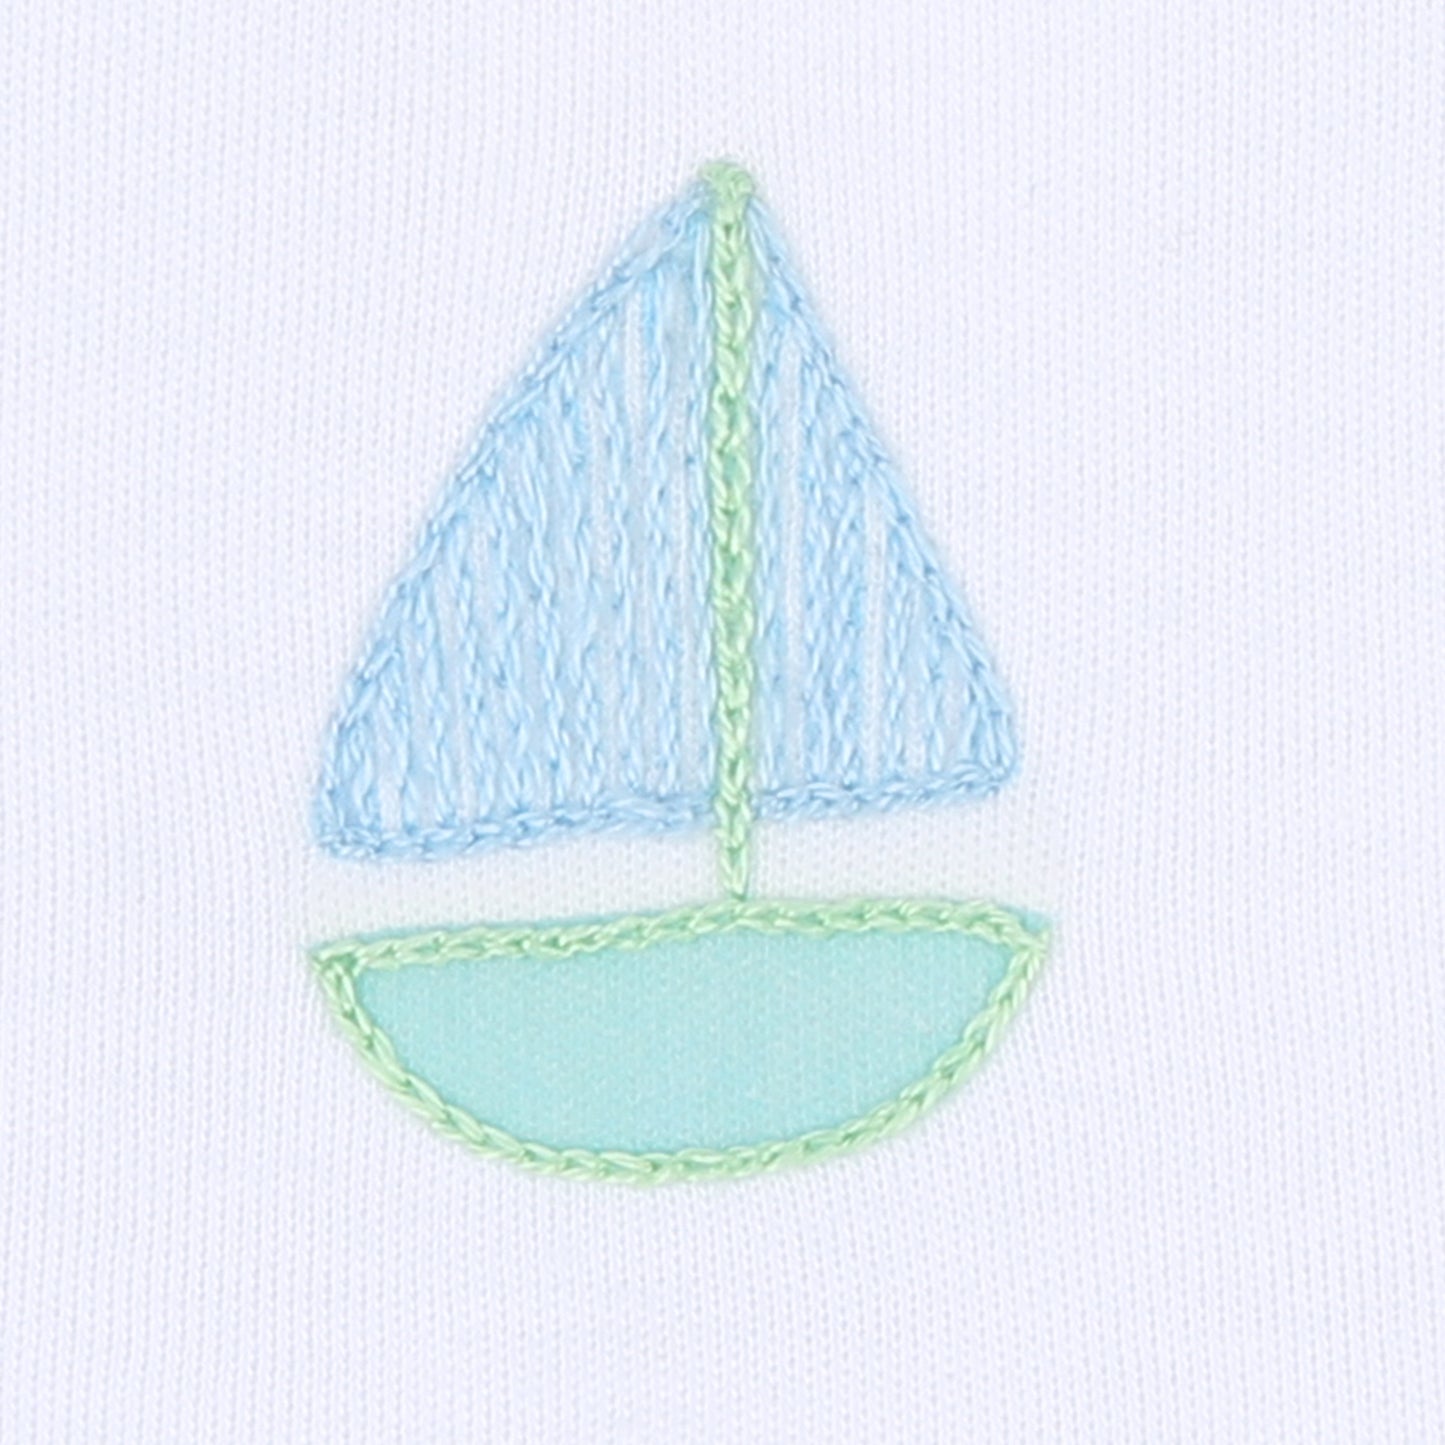 Sweet Sailing Embroidered Burp Cloth